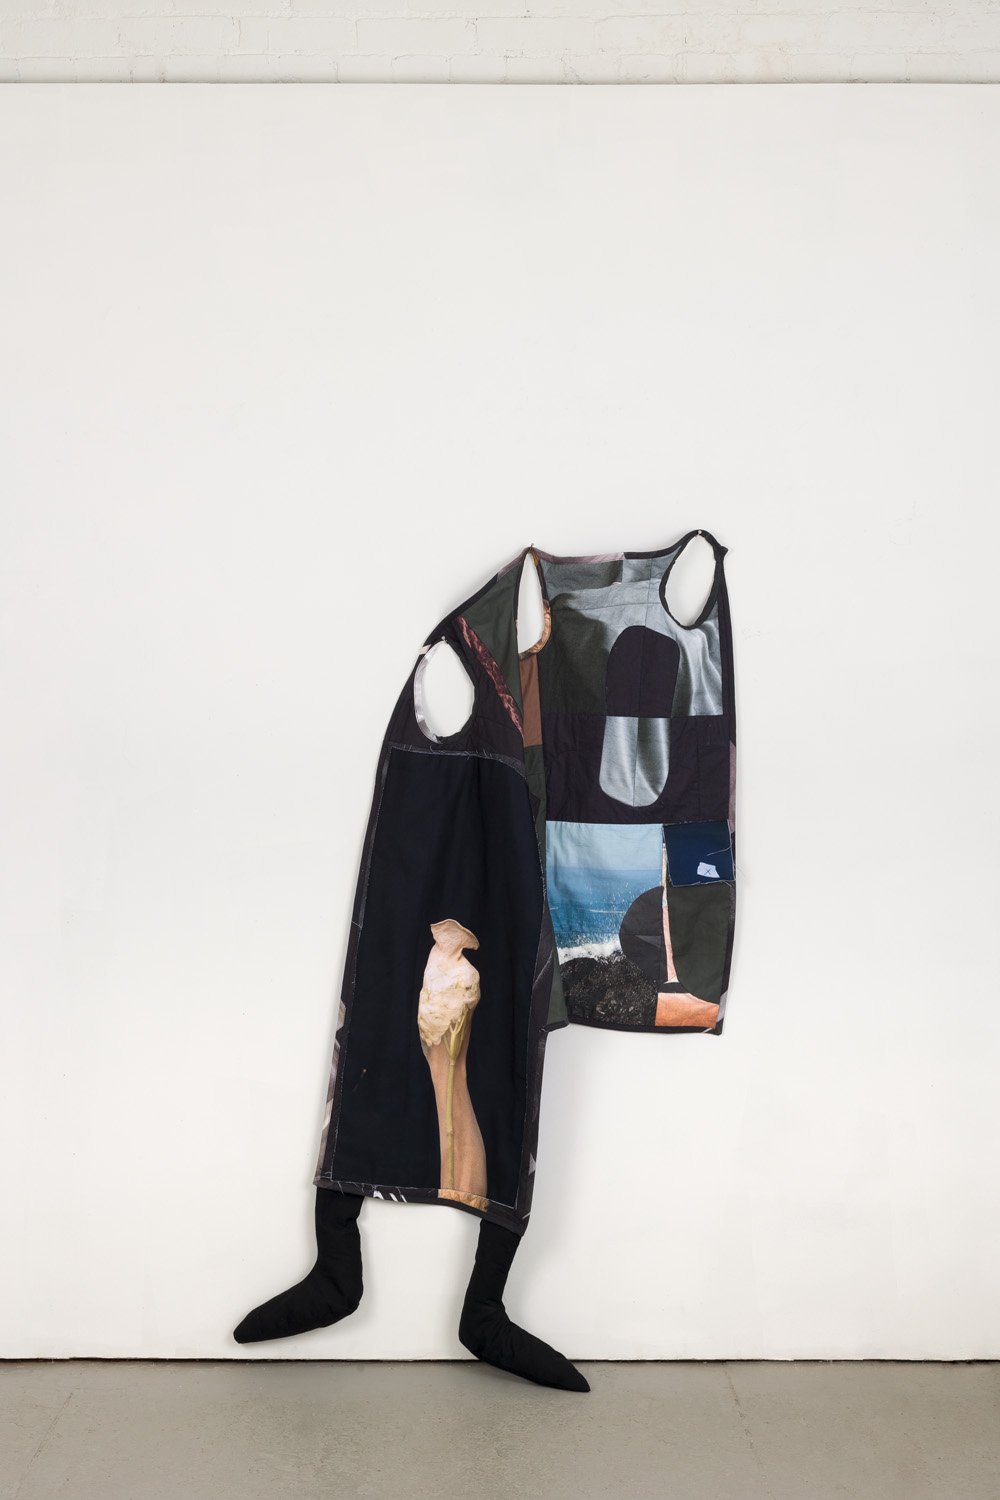  'Walk This Way' (2022), photographs printed on fabric, old clothes, cut, pieced, and sewn, cotton batting, 64” x 39” x 7”